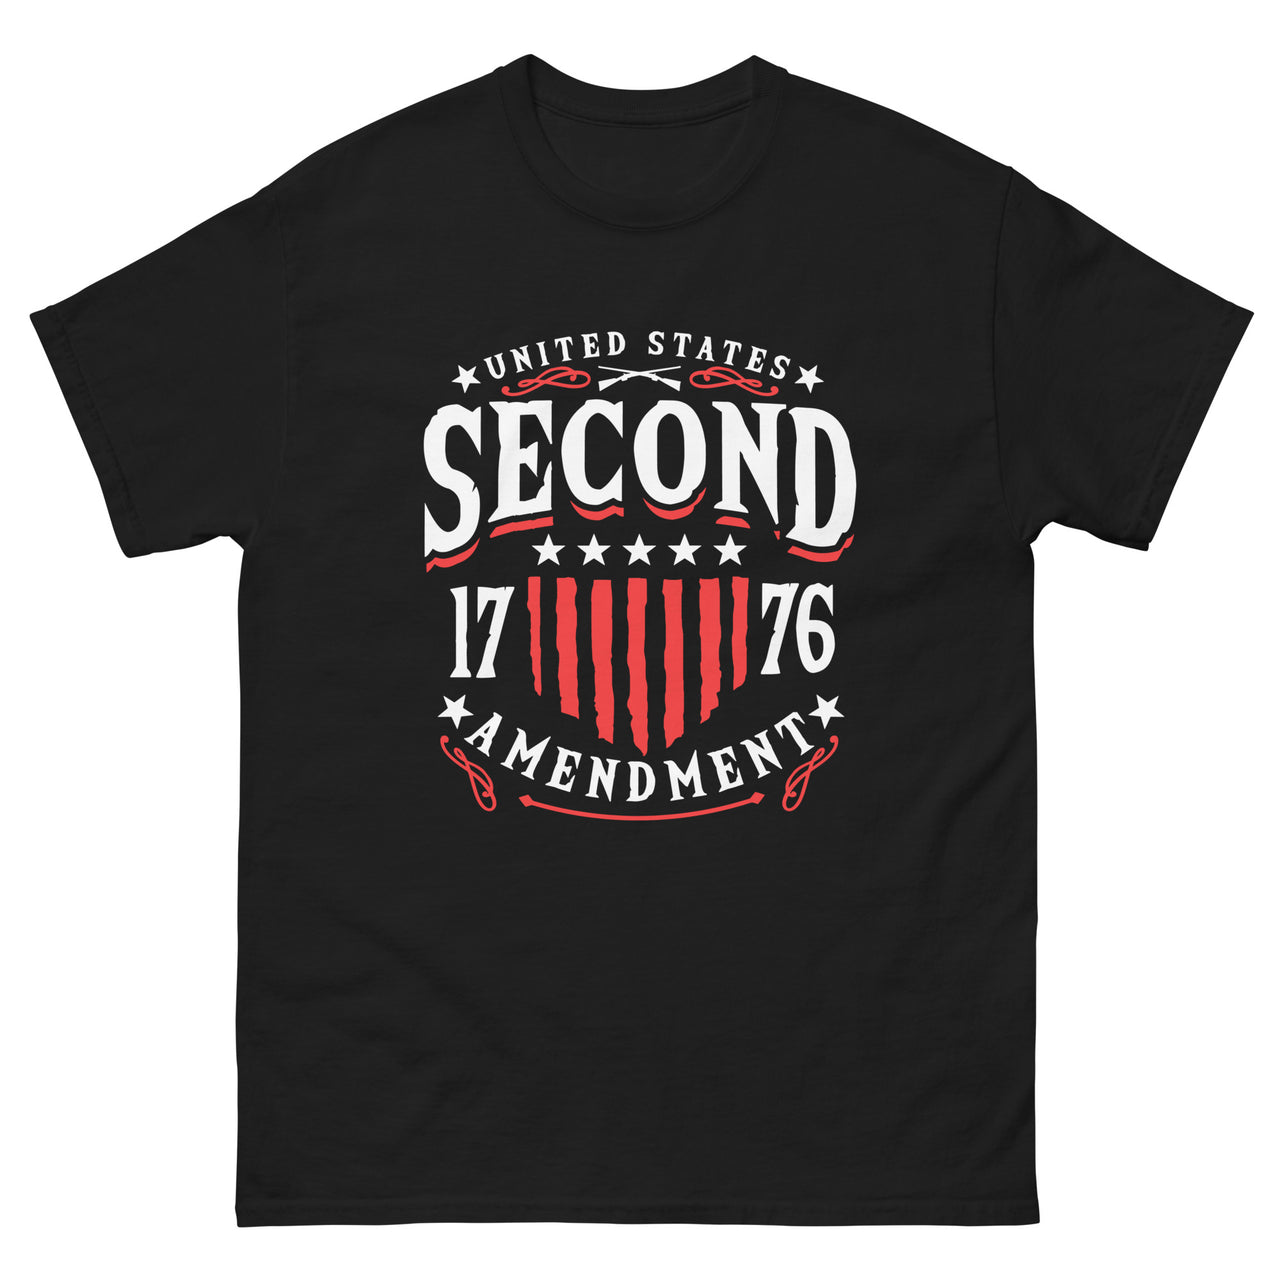 United States Second Amendment 1776 Men's classic tee Image On Front Men's classic tee